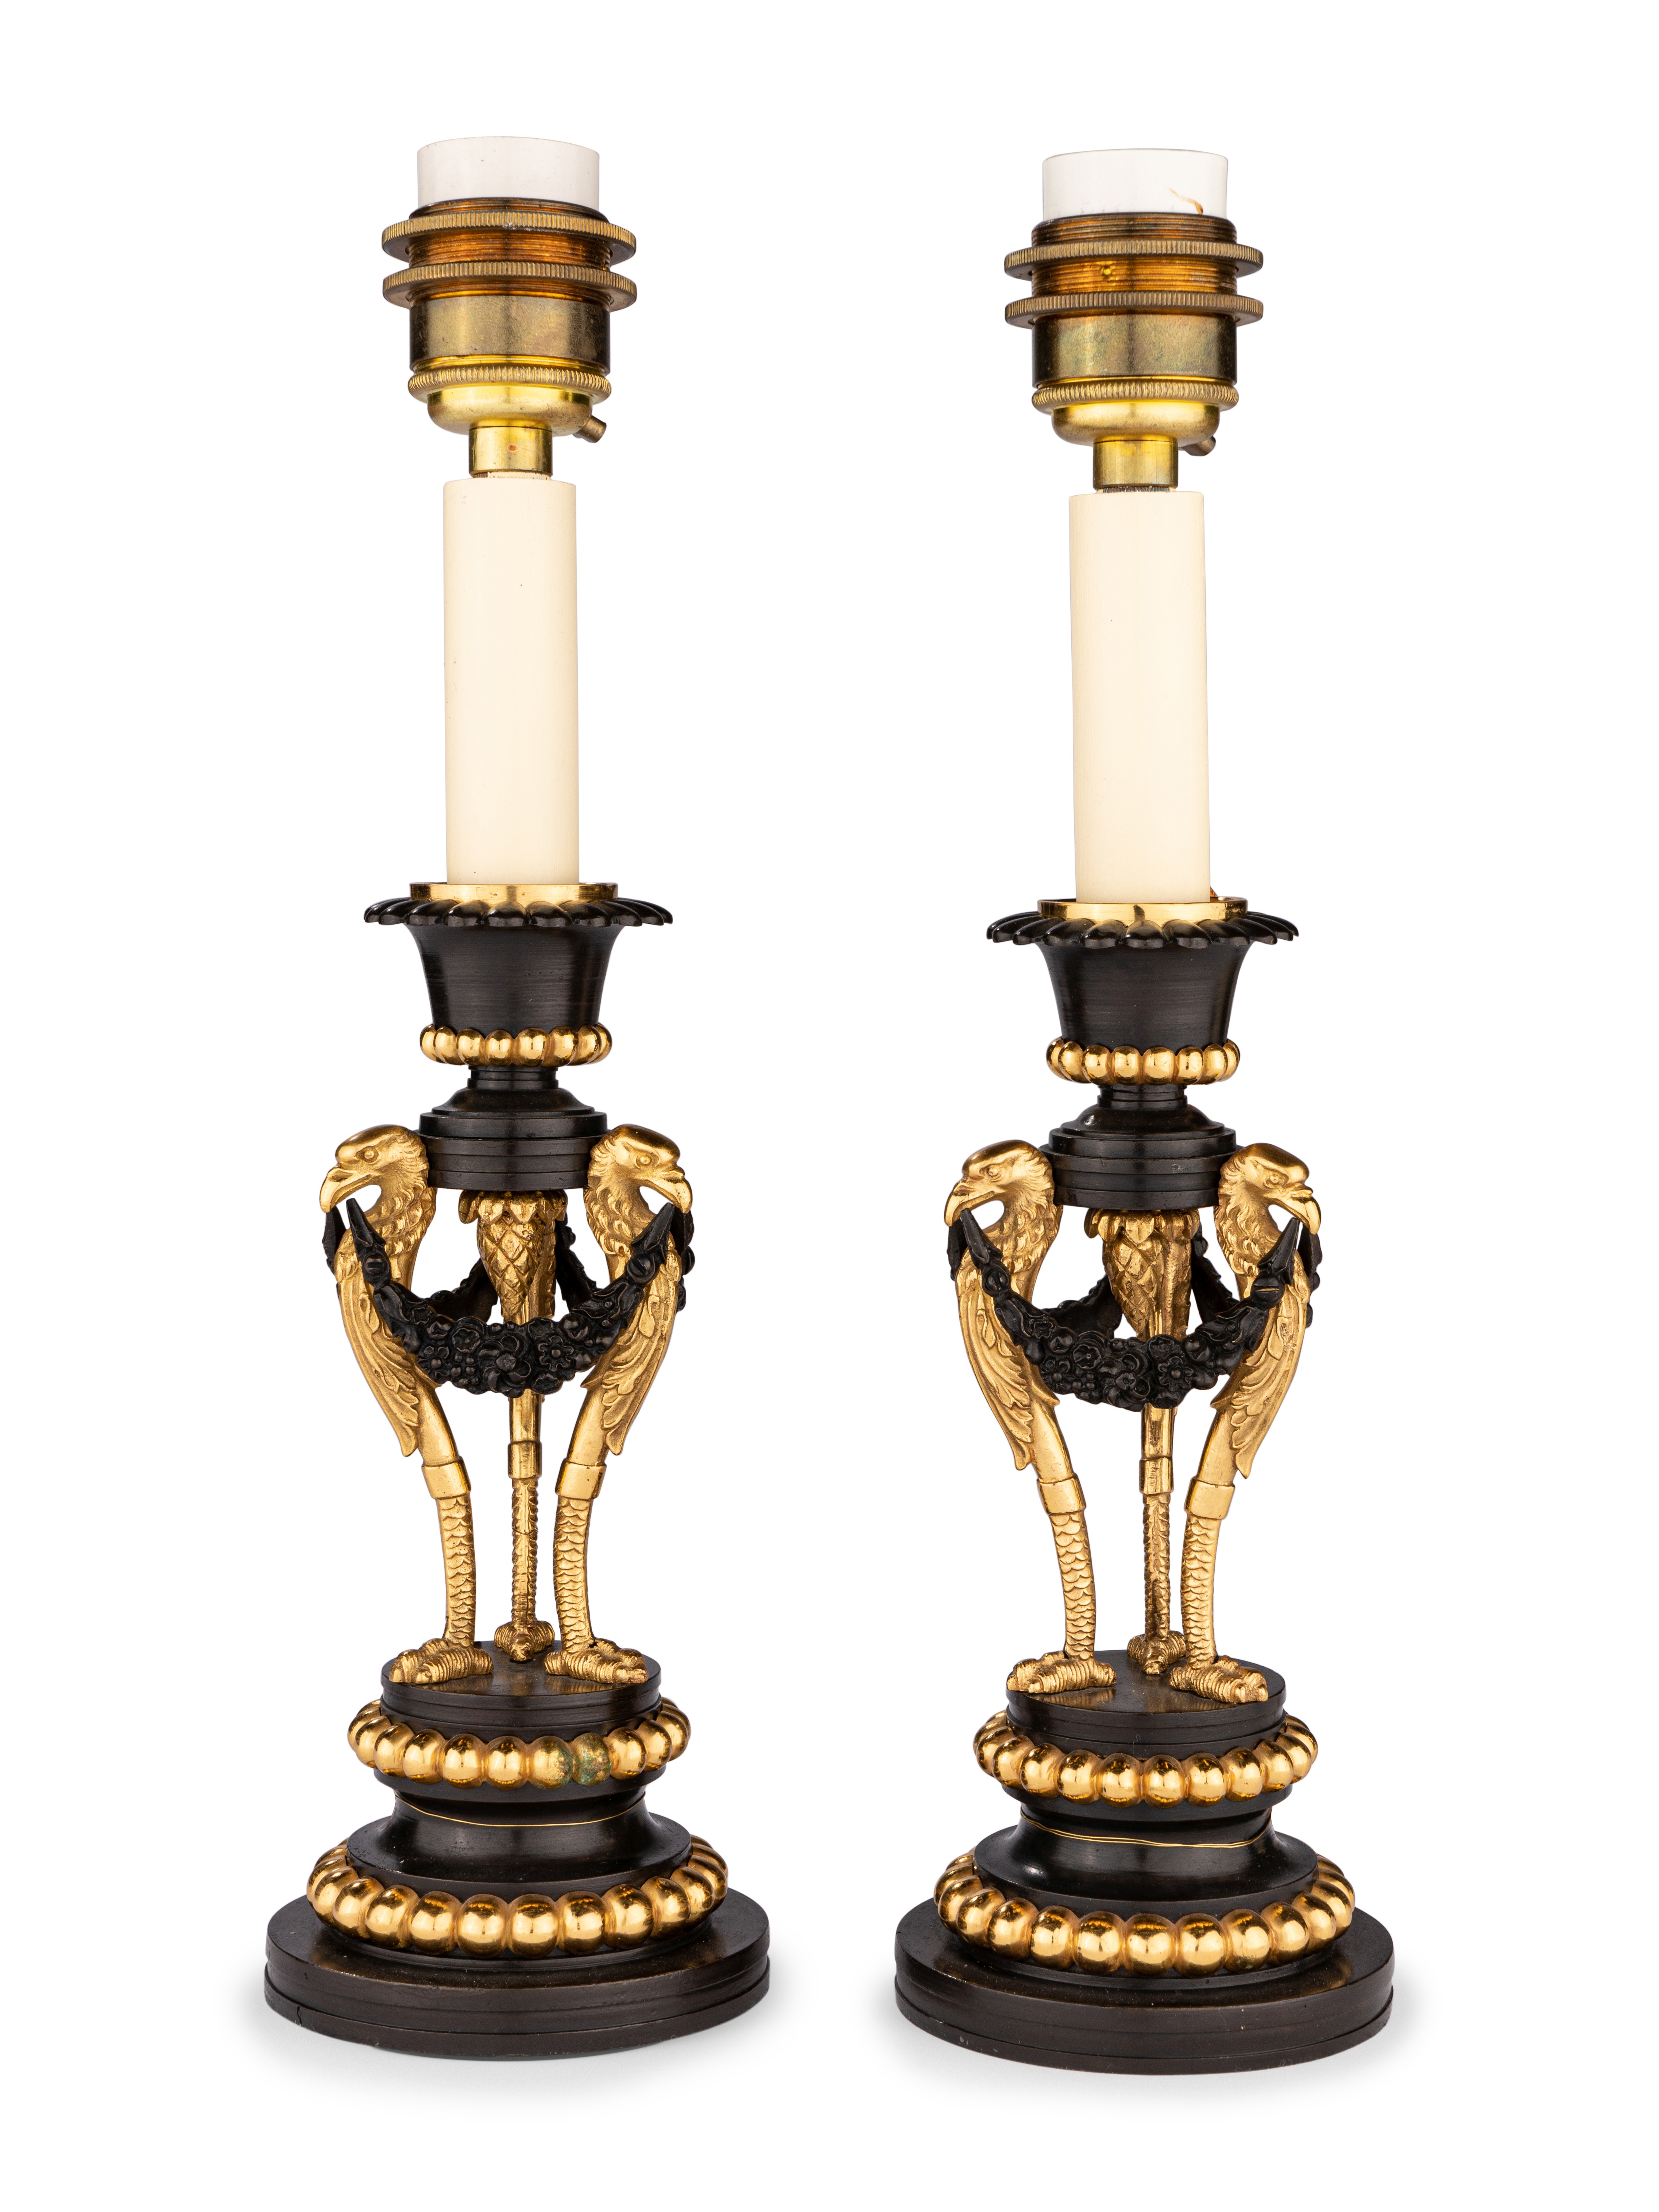 A Pair of Directoire Parcel-Gilt Bronze Candlesticks - Image 2 of 7